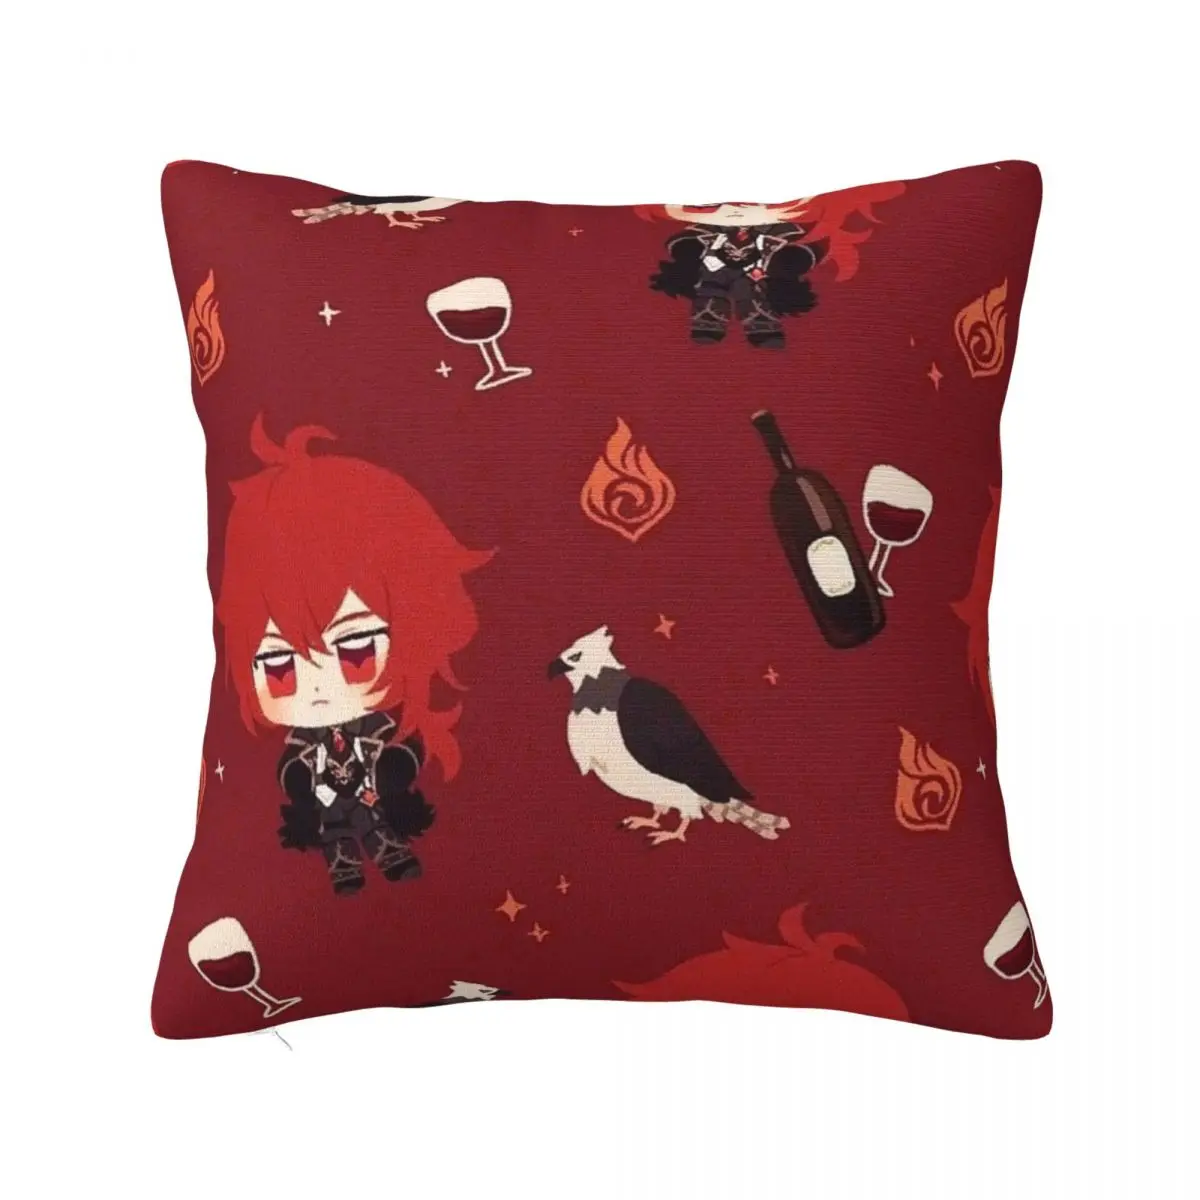 

Diluc Genshin Impact Pillowcase Printed Fabric Cushion Cover Decorations Game Pillow Case Cover Seat Dropshipping 40*40cm